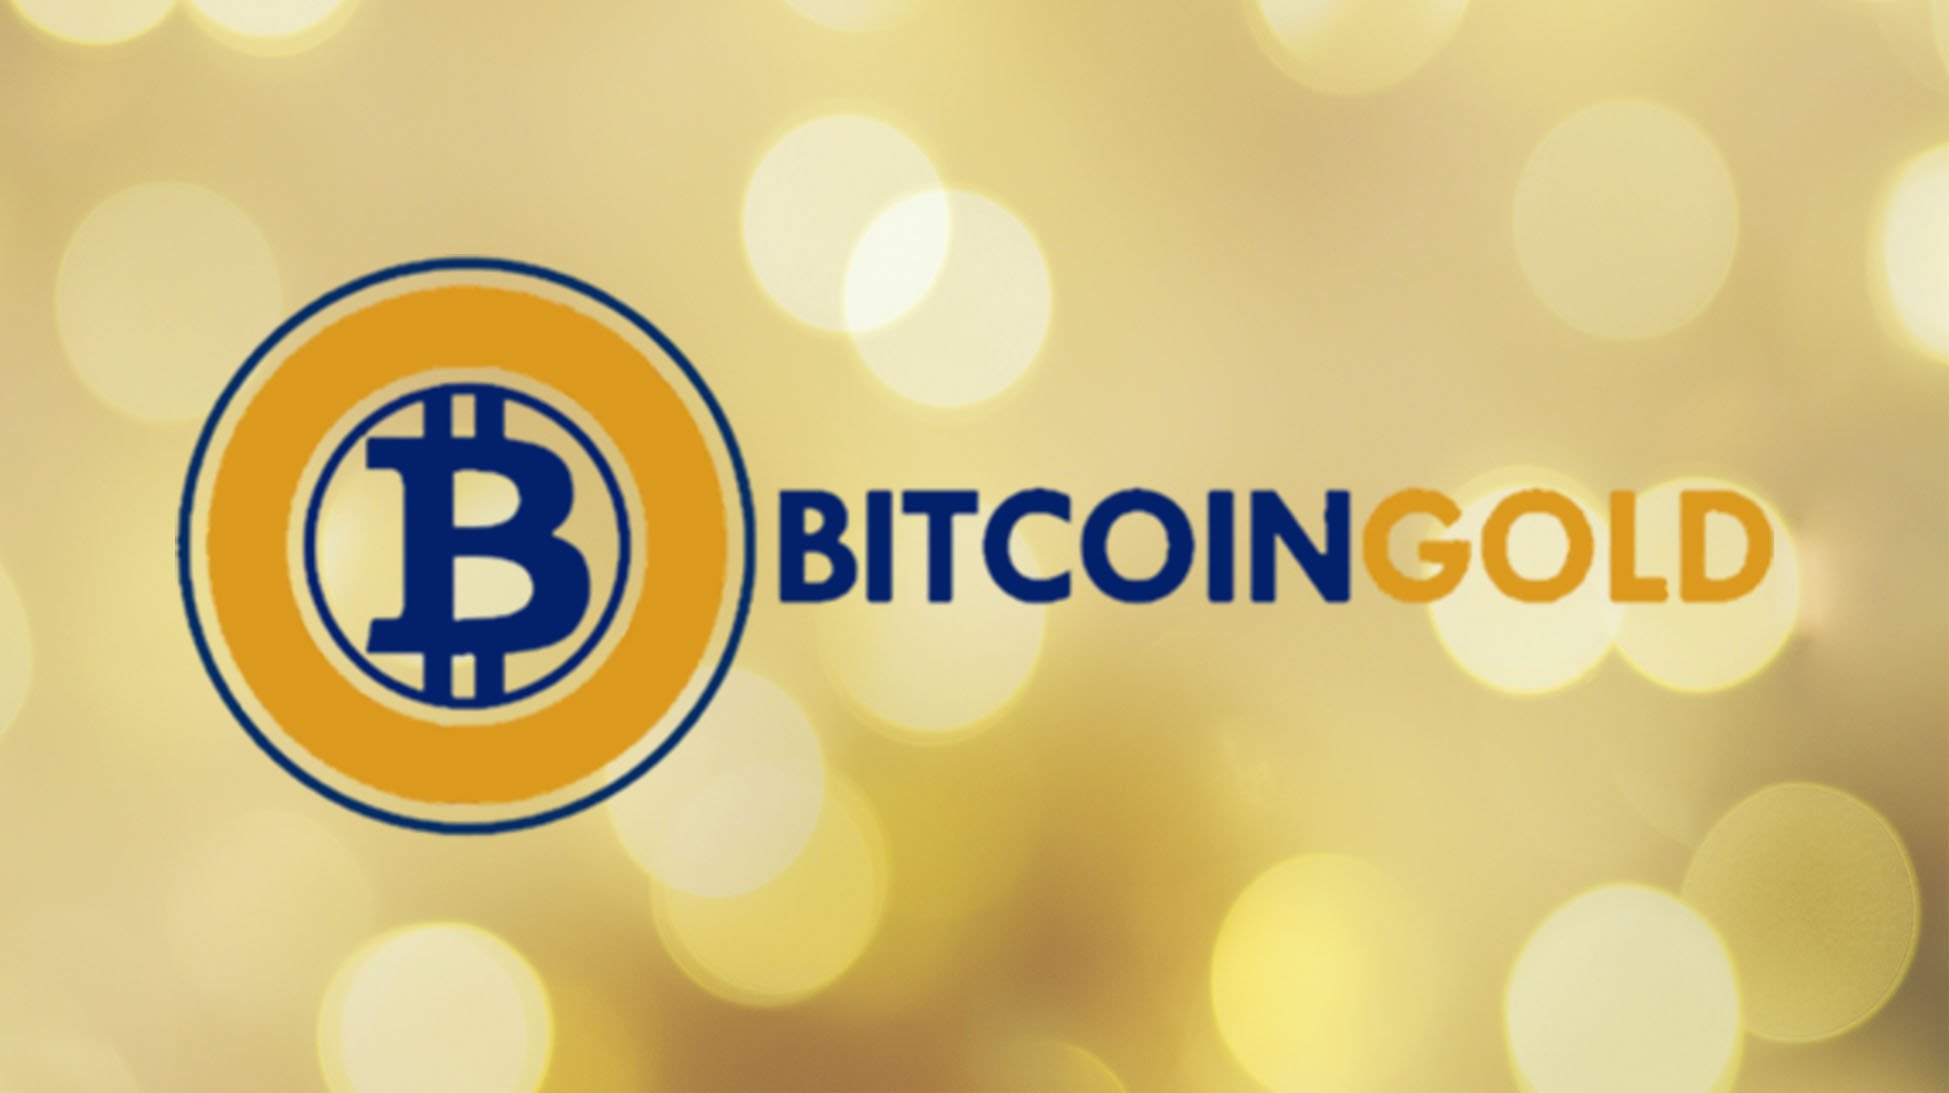 What is btg cryptocurrency btc price on 1 16 18 by hour